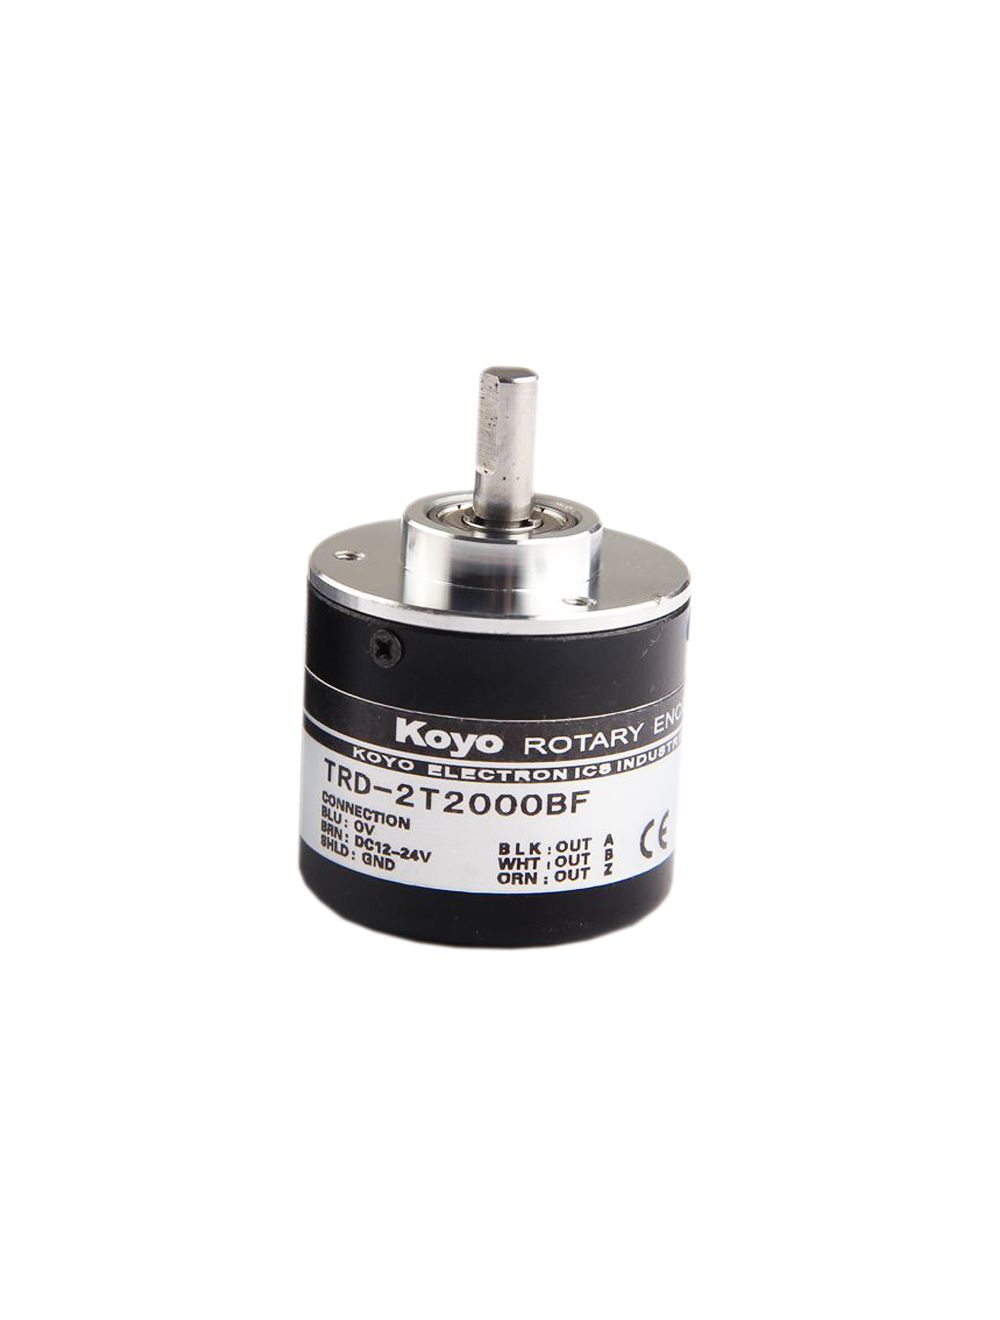 New In stock for sale, KOYO Solid-shaft Incremental Rotary Encoder TRD-2T2000BF